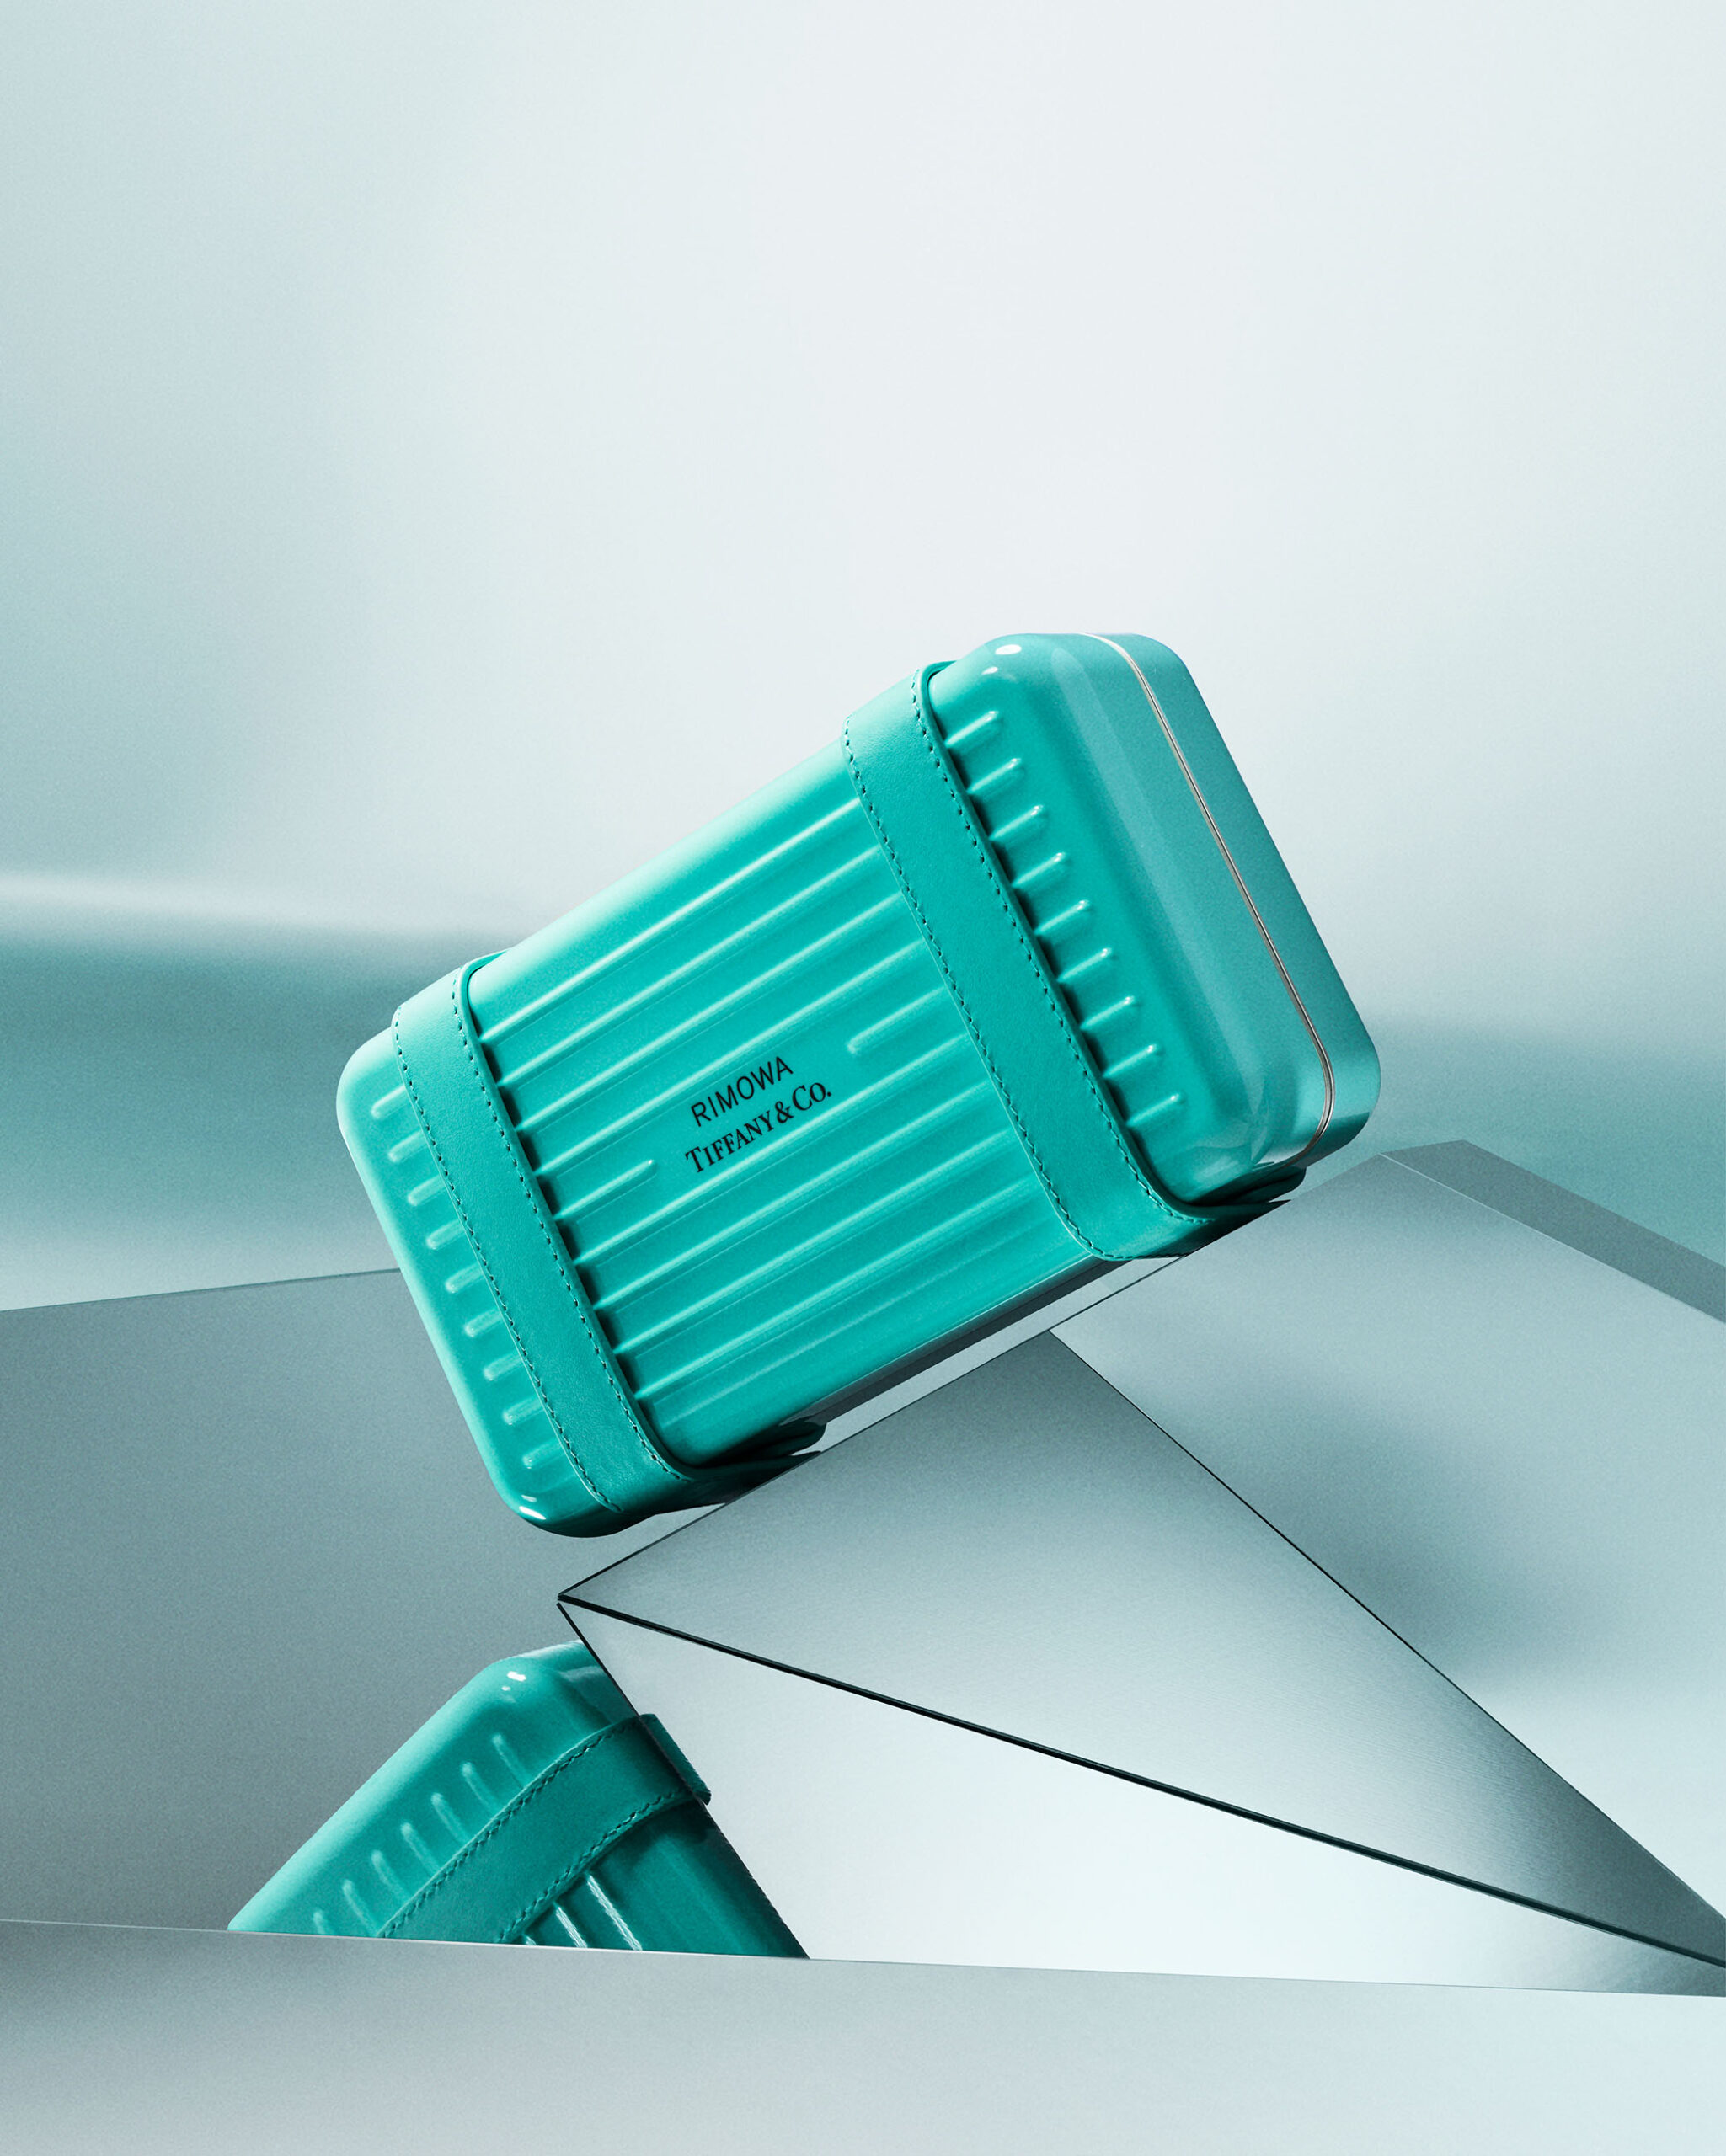 new rimowa tiffany &co luxury trolley and luggage collection